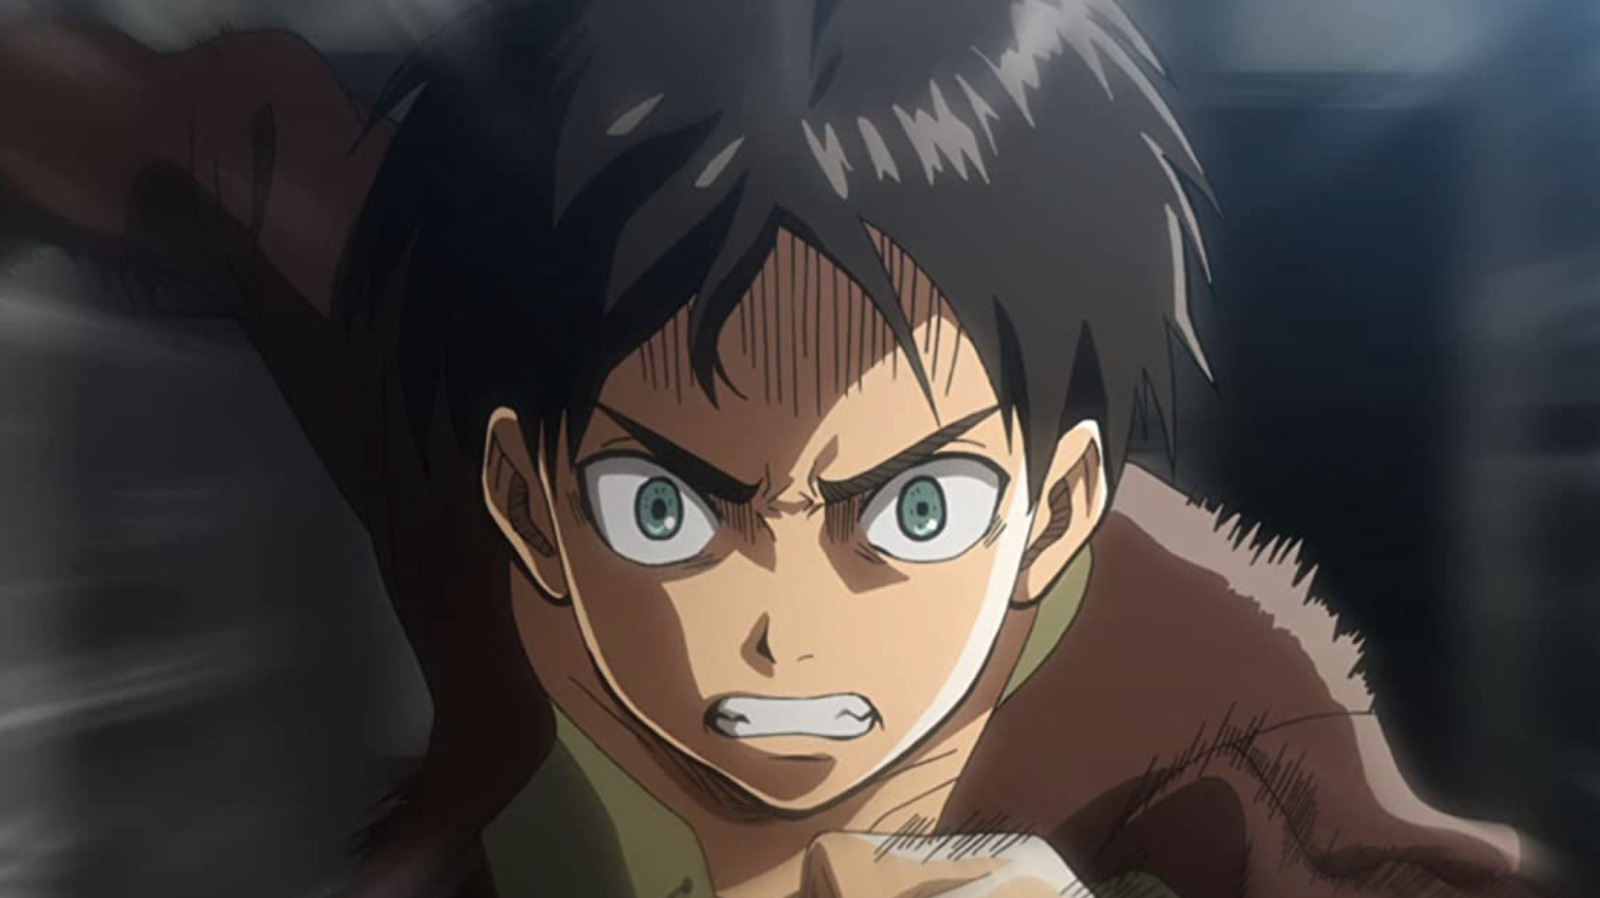 Attack on Titan box set review - teens tangle with people-eating giants in  this spellbinding anime, Animation on TV